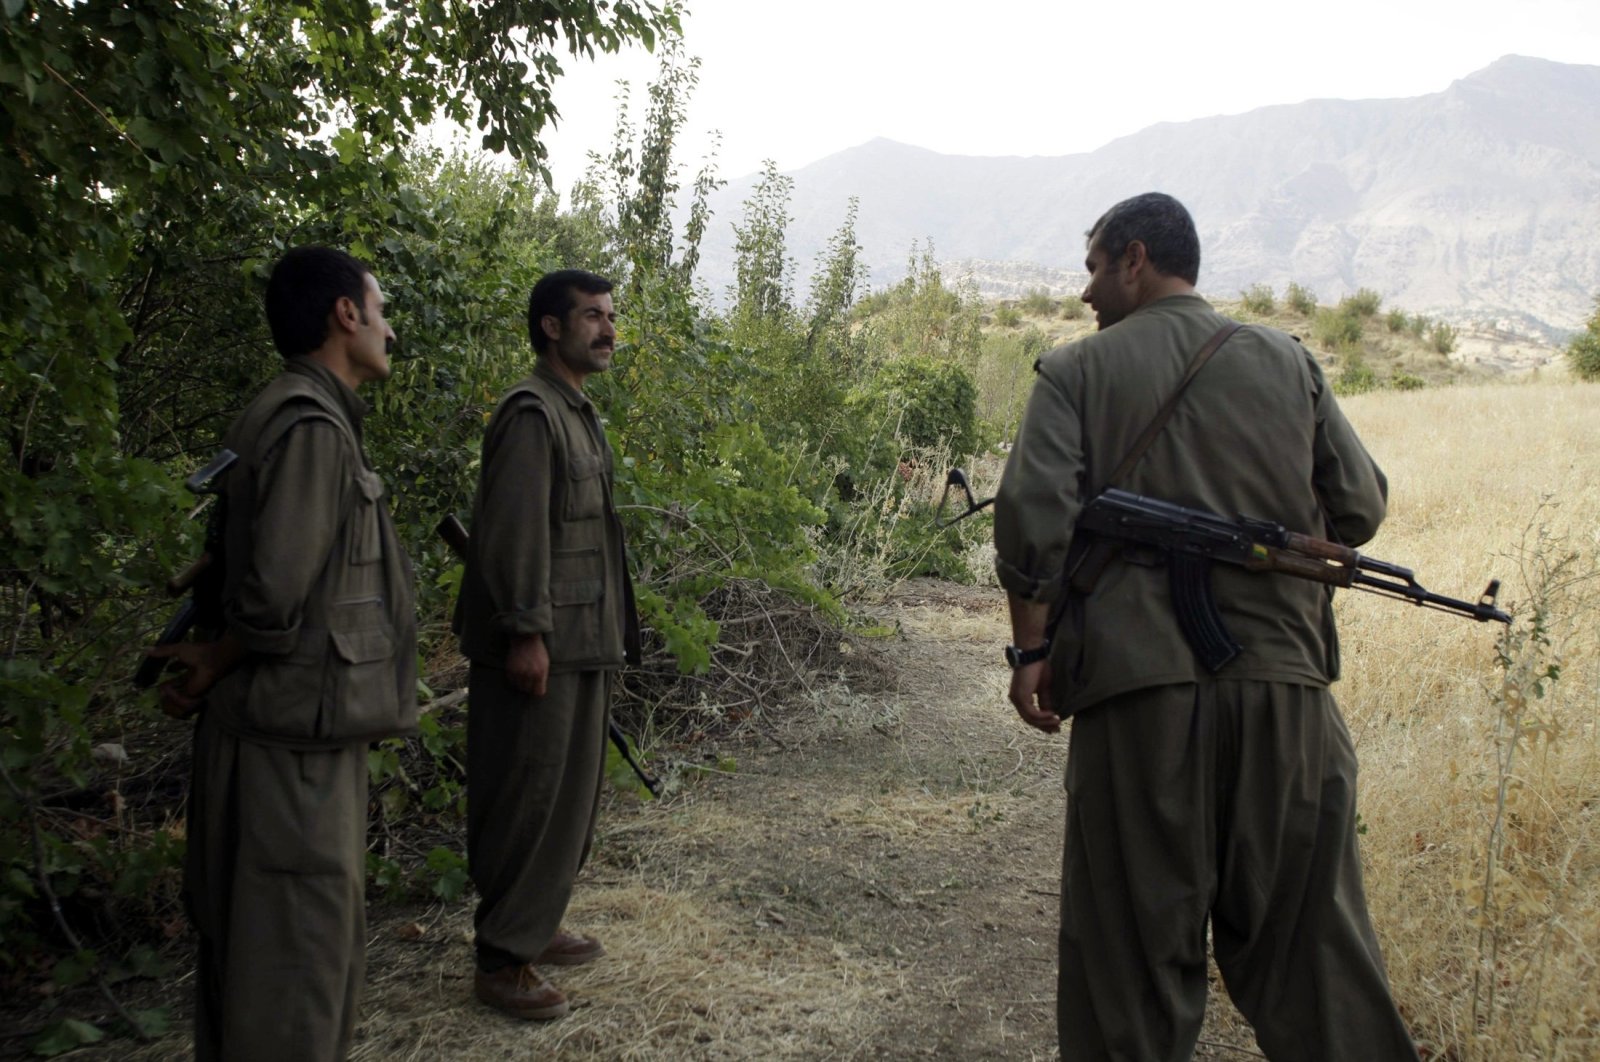 PKK terrorists stand guard in the remote Qandil mountains near the Iraq-Turkish border in Sulaimaniya, 330 kilometers (205 miles) northeast of Baghdad, Aug. 13, 2010. (Reuters File Photo)